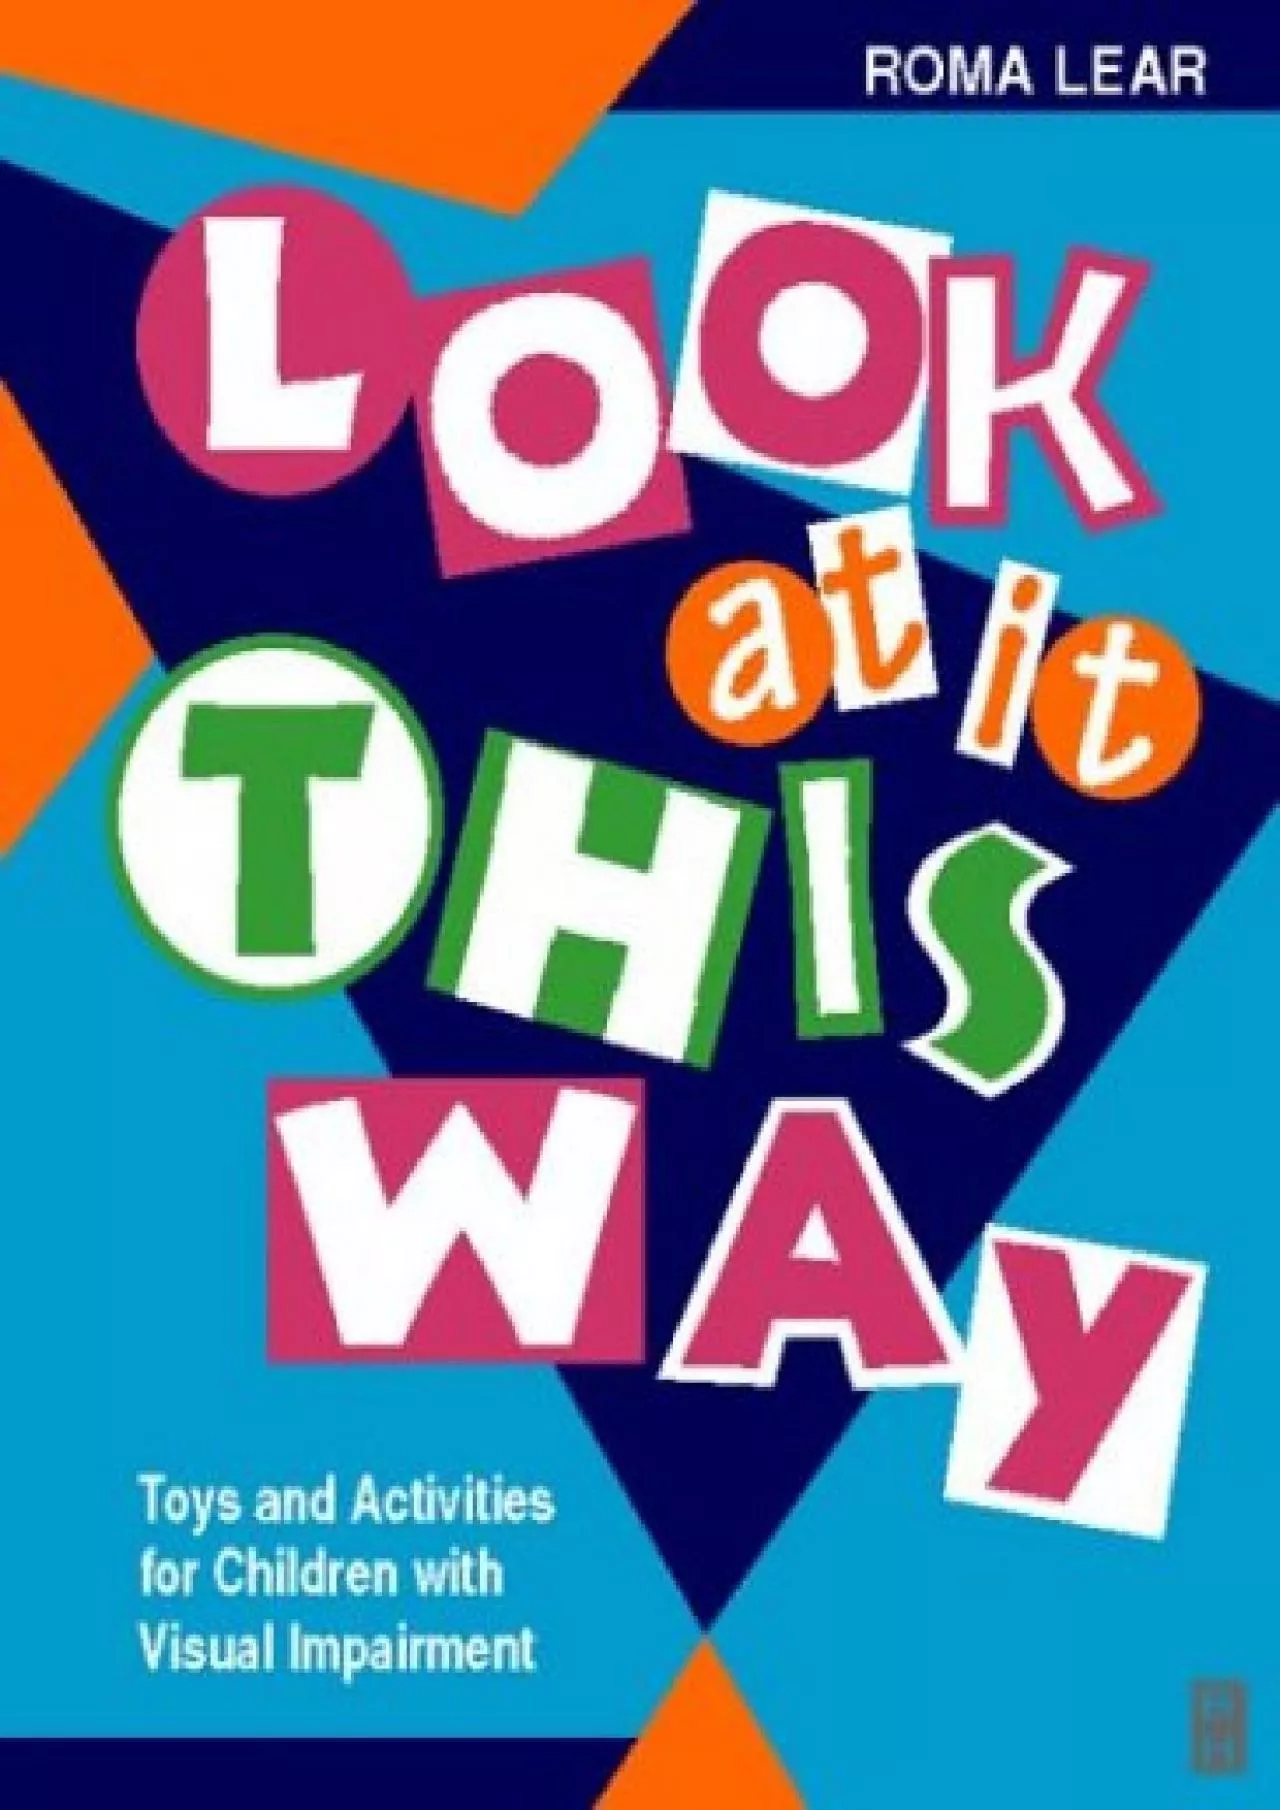 (EBOOK)-Look At It This Way: Toys and Activities for Children with Visual Impairment (Play